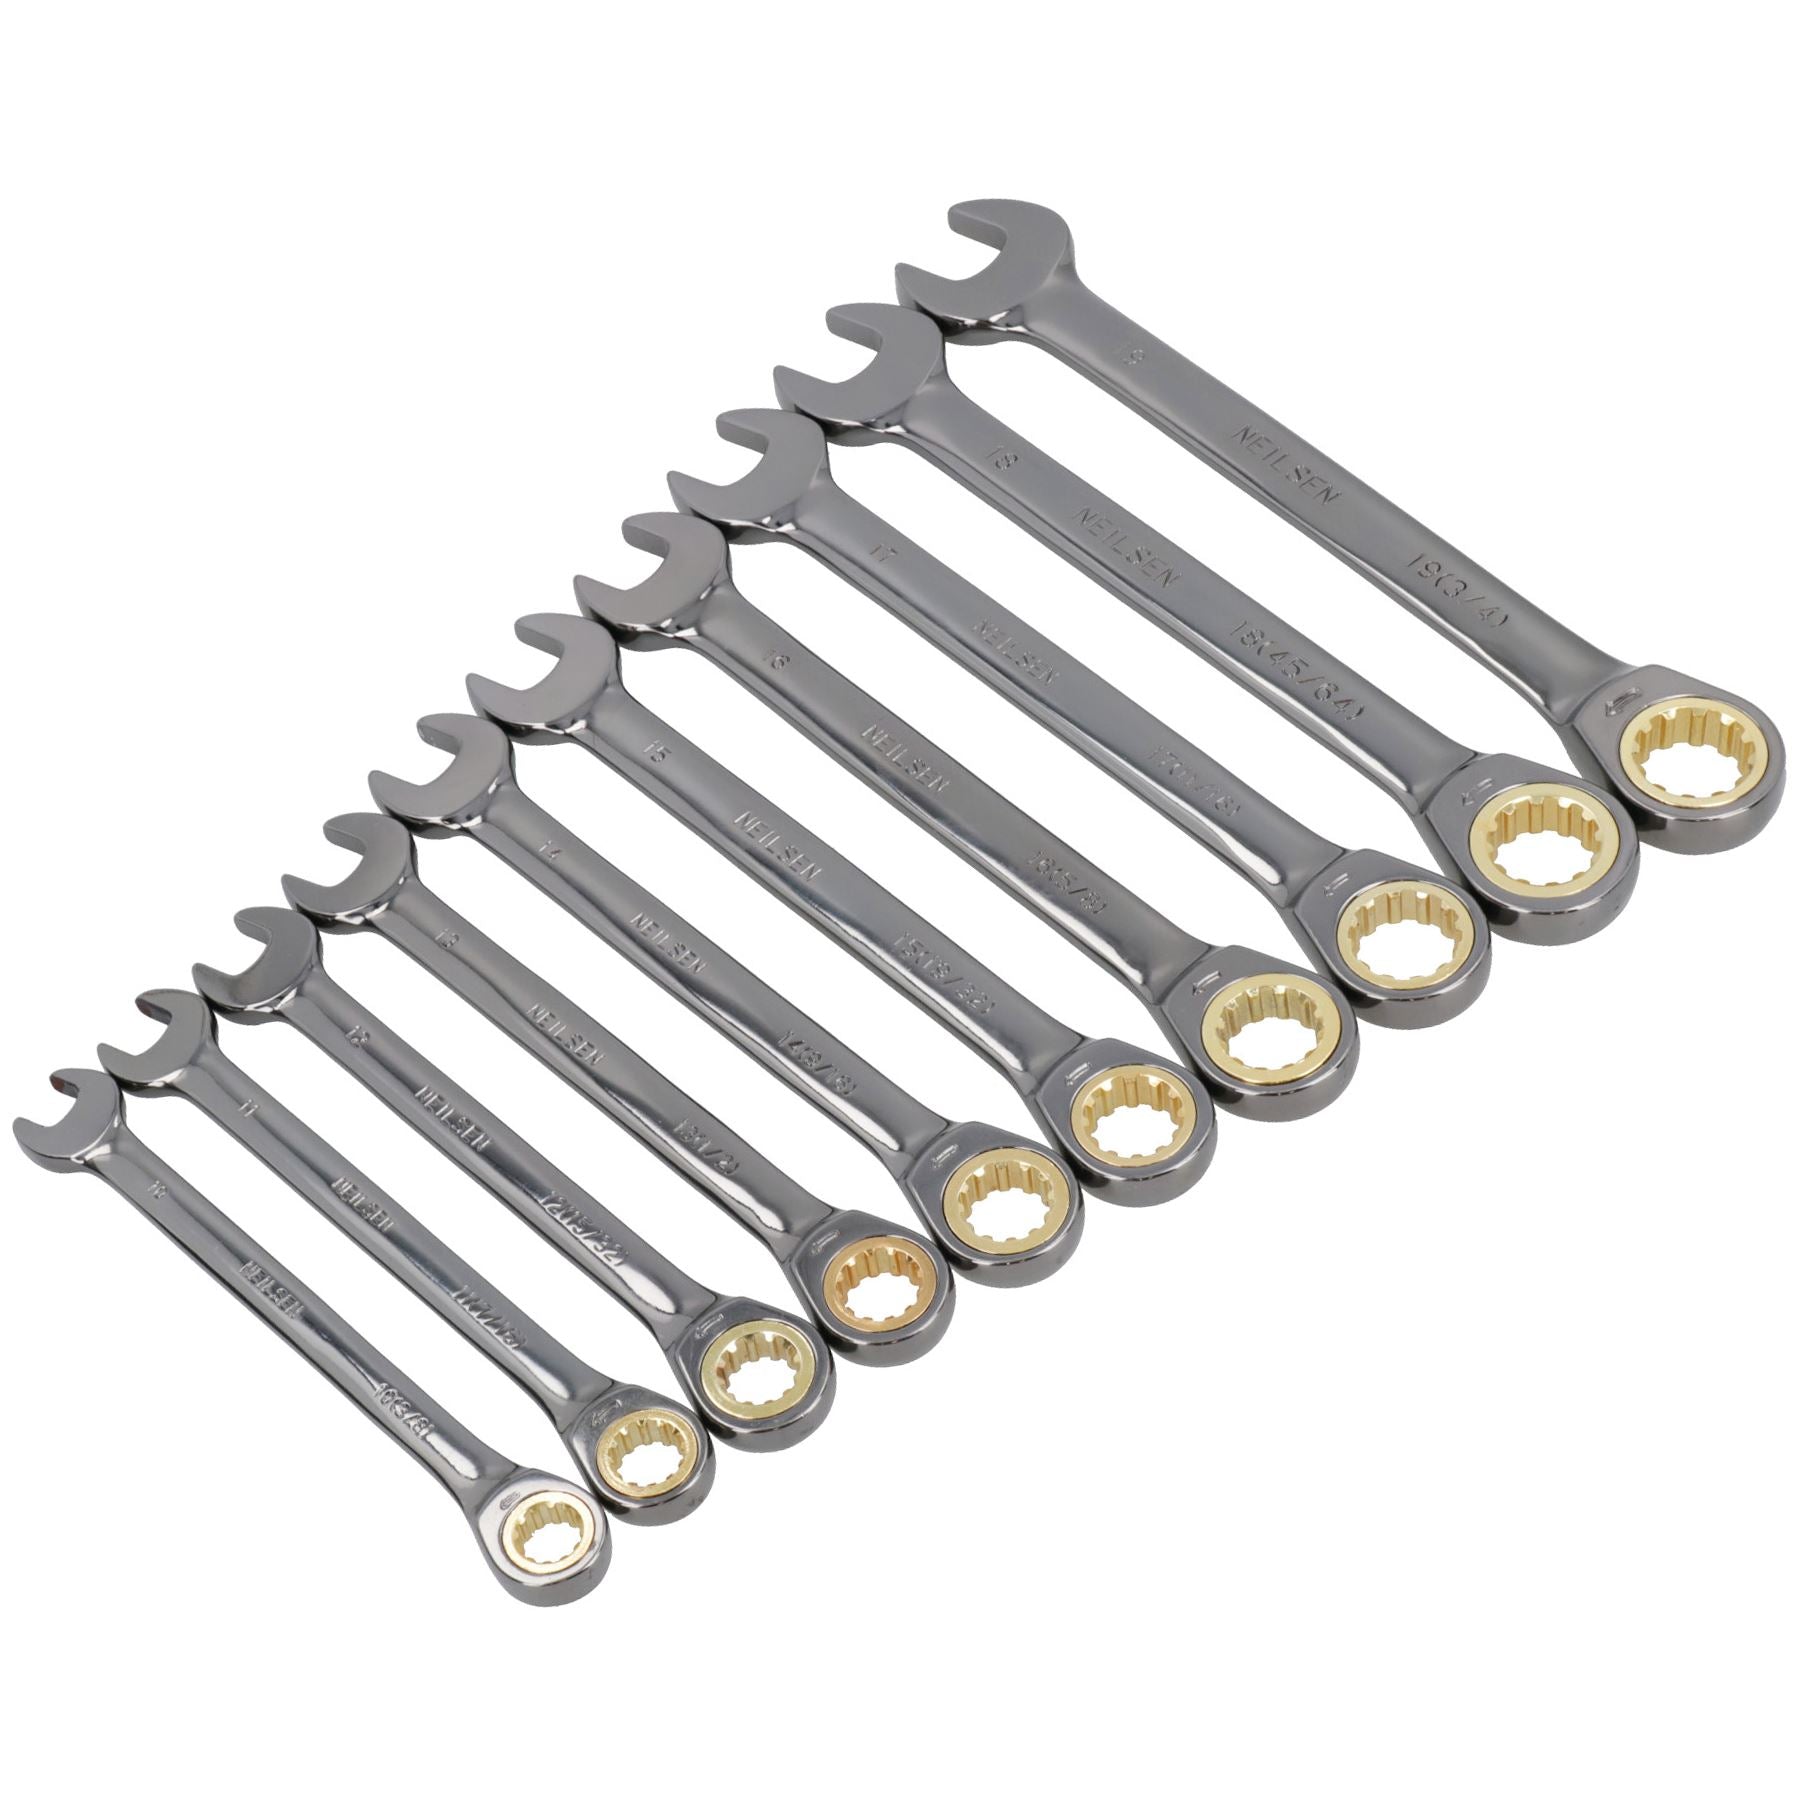 Metric + SAE Ratchet Combination Wrench Spanner Set 10 – 19mm 3/8in – 3/4in.